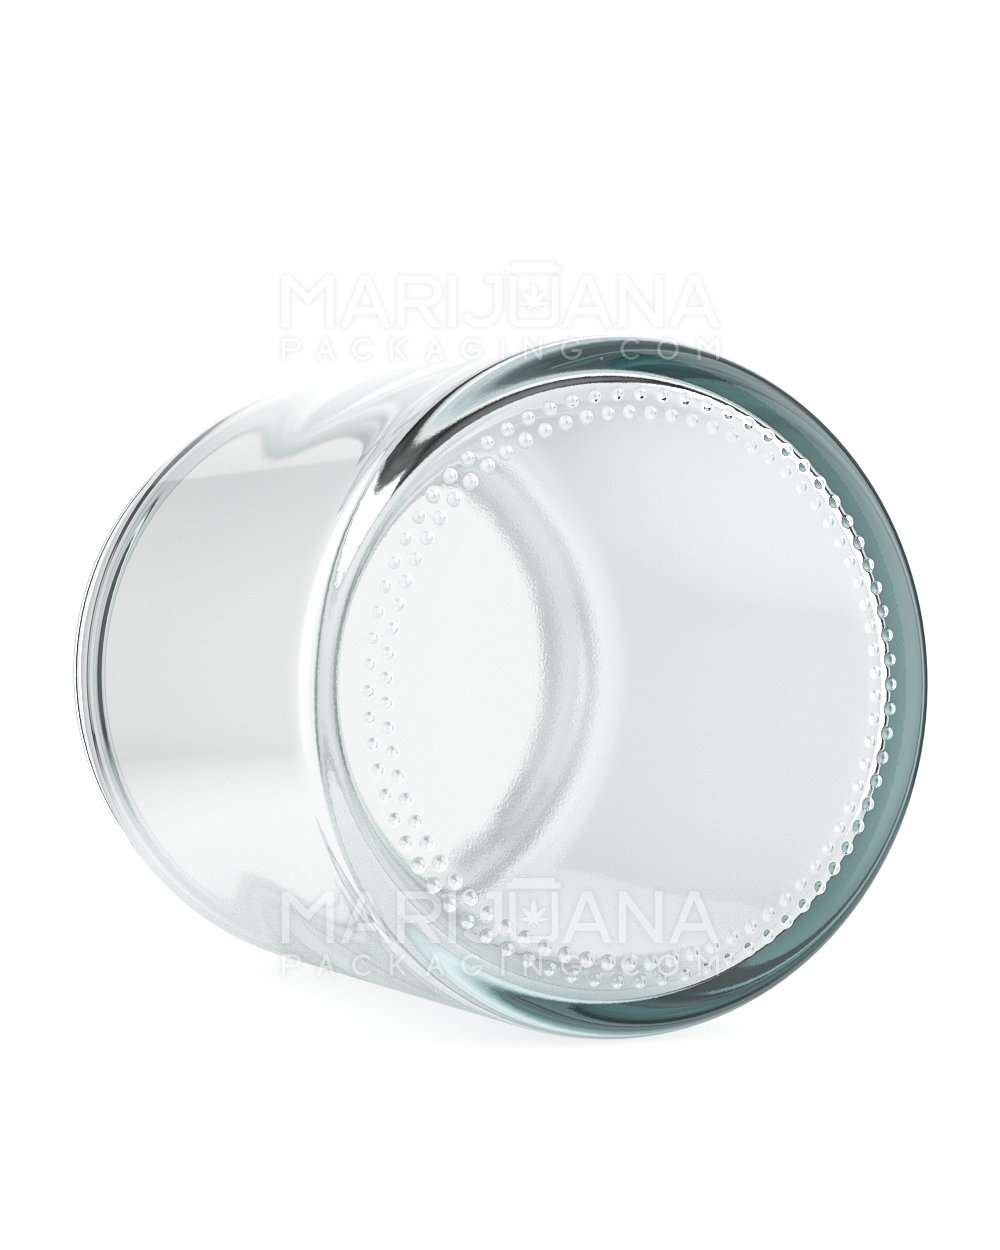 Straight Sided Clear Glass Jars | 70mm - 8oz - 24 Count - 5